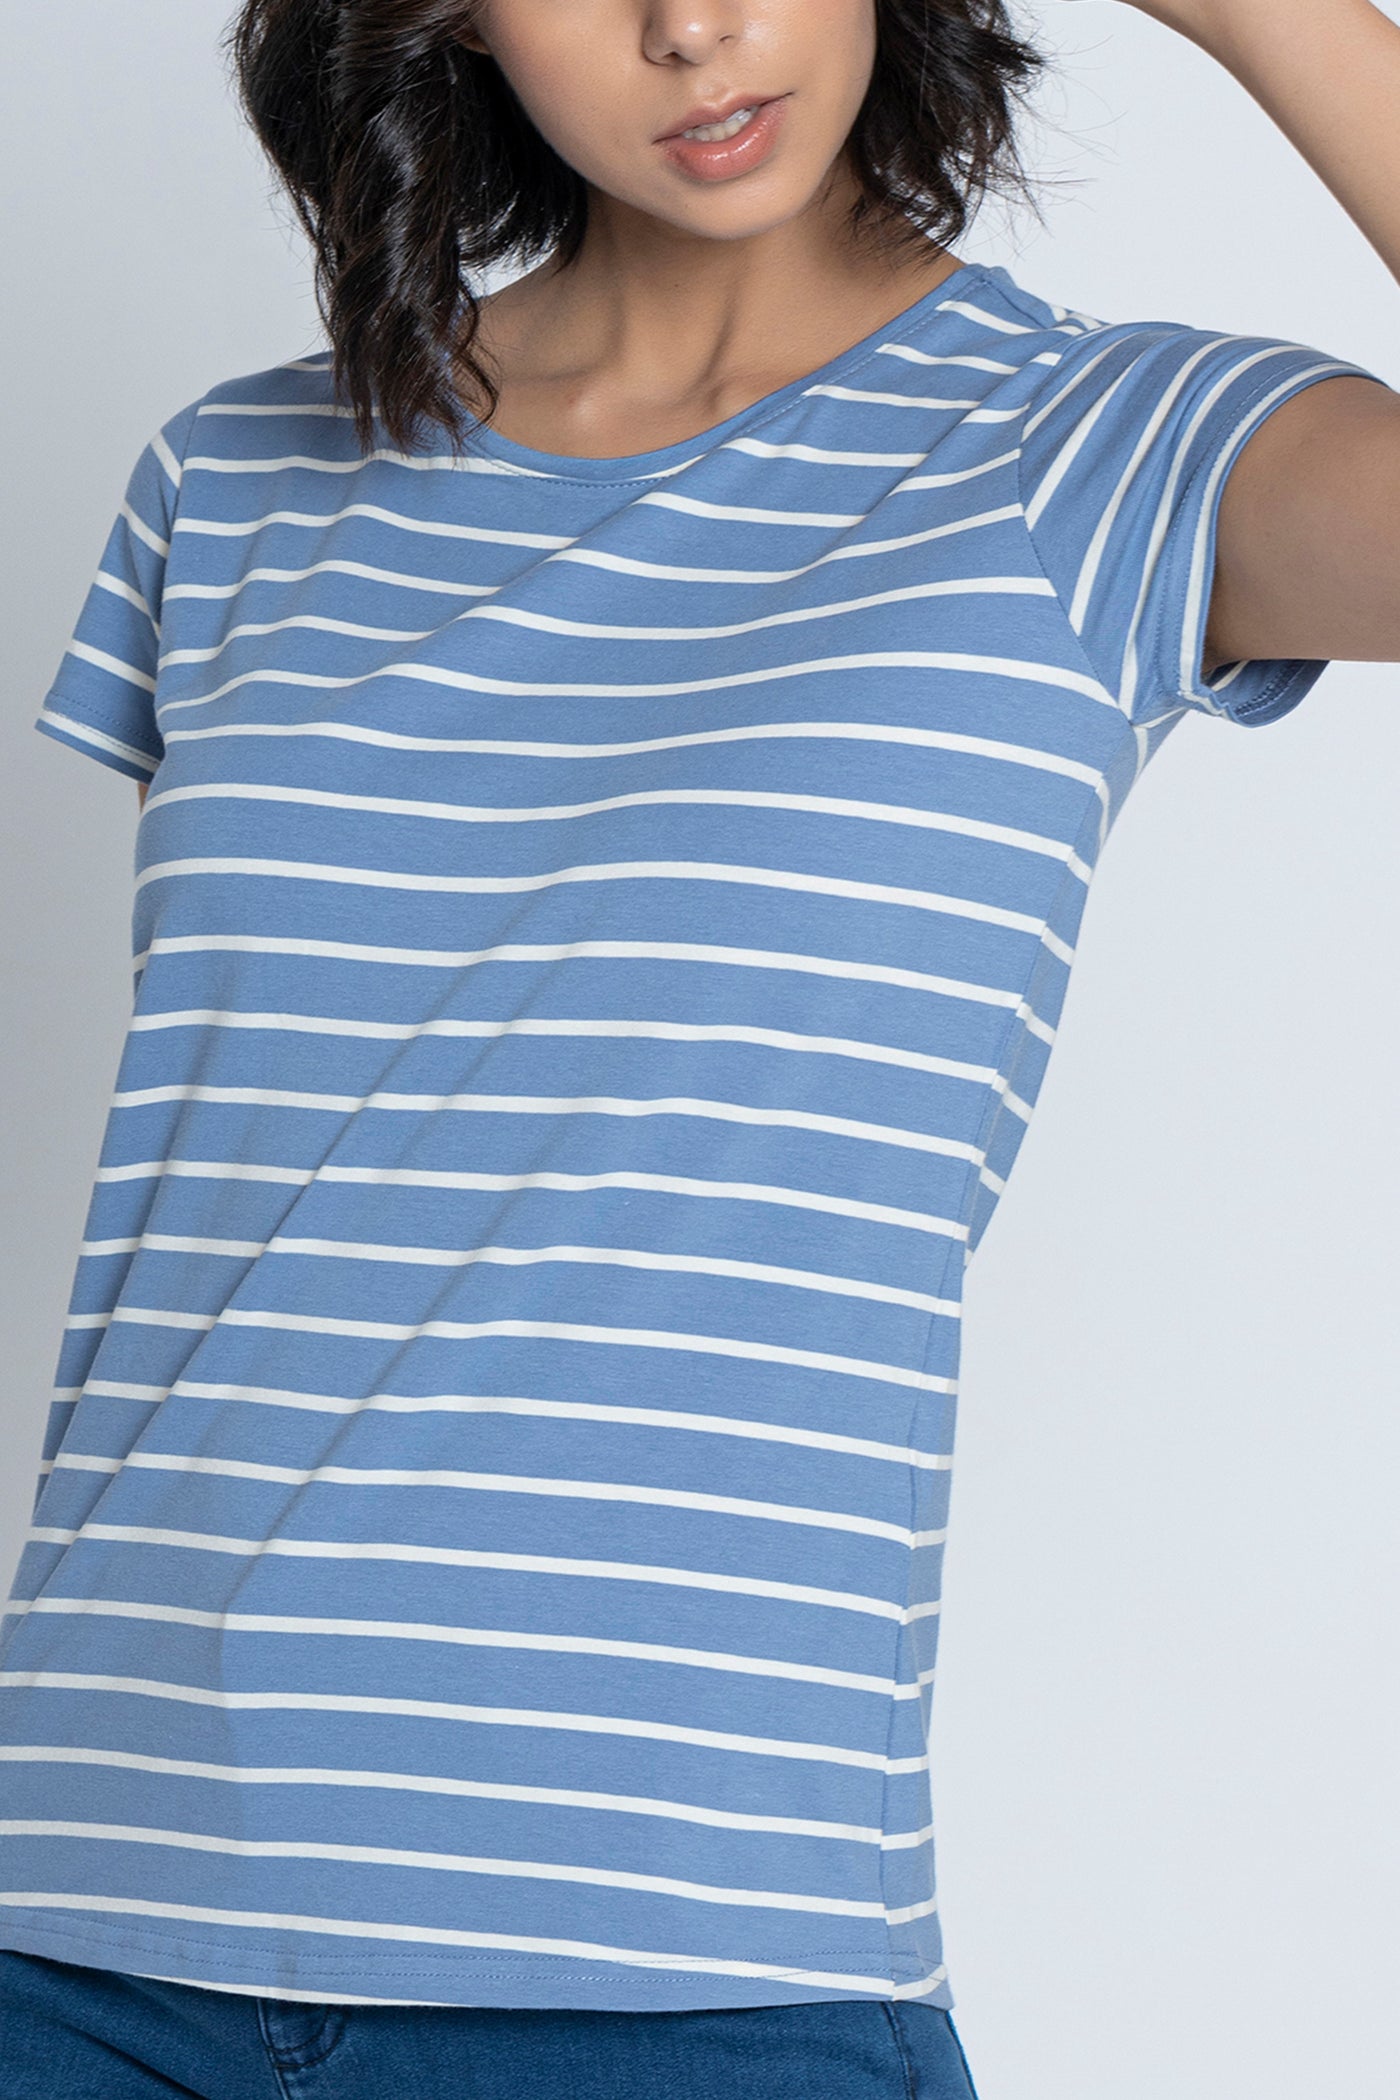 Blue with White Stripes Short Sleeves T-Shirt